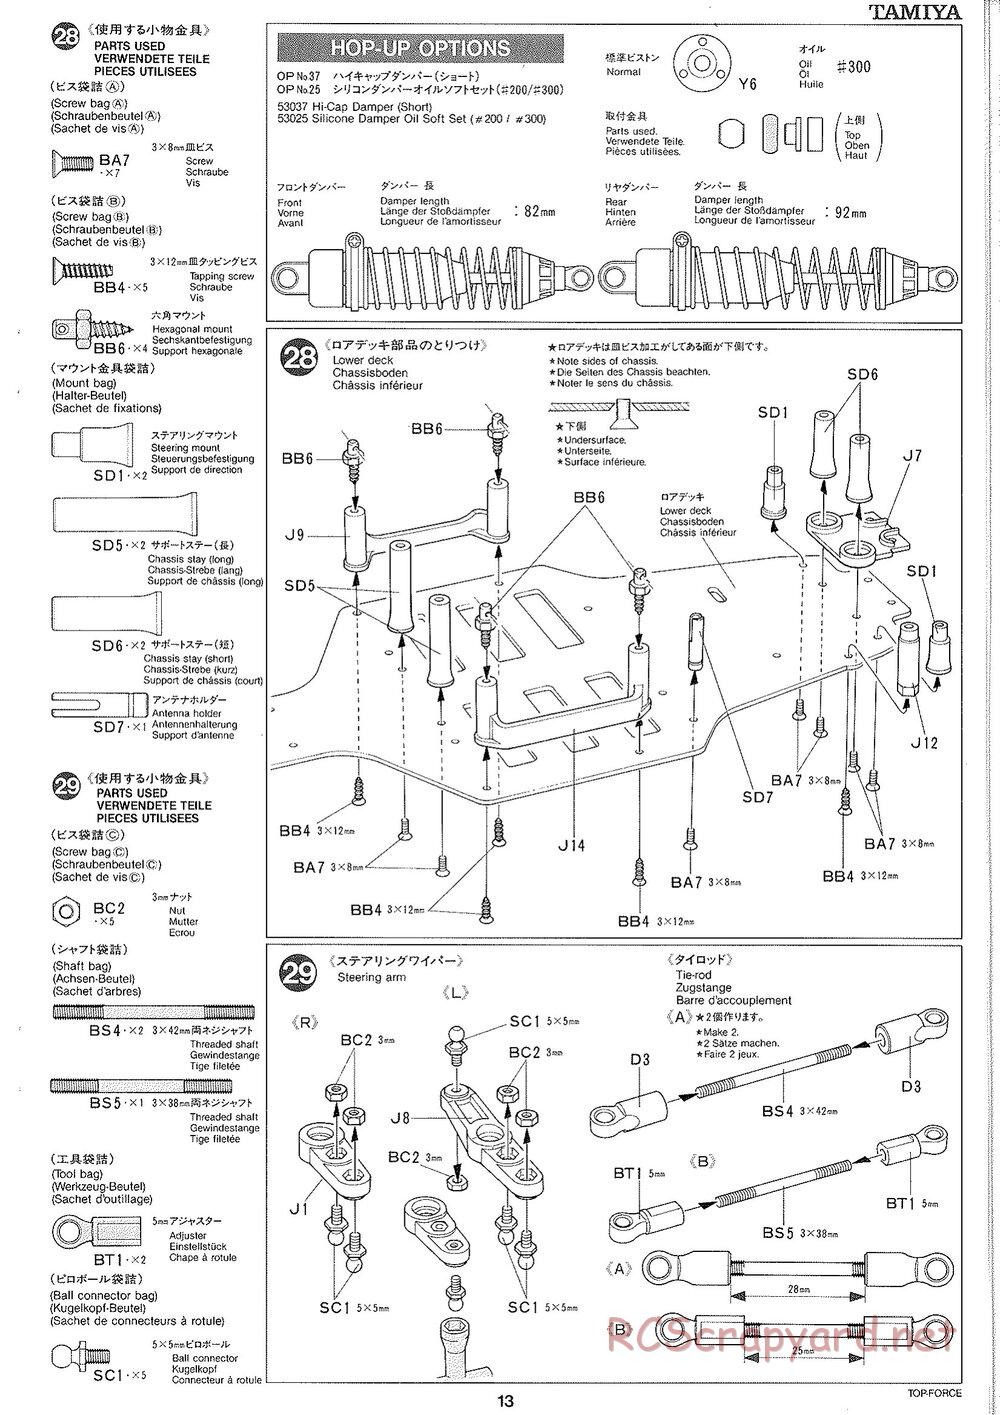 Tamiya - Top Force 2005 - DF-01 Chassis - Manual - Page 13